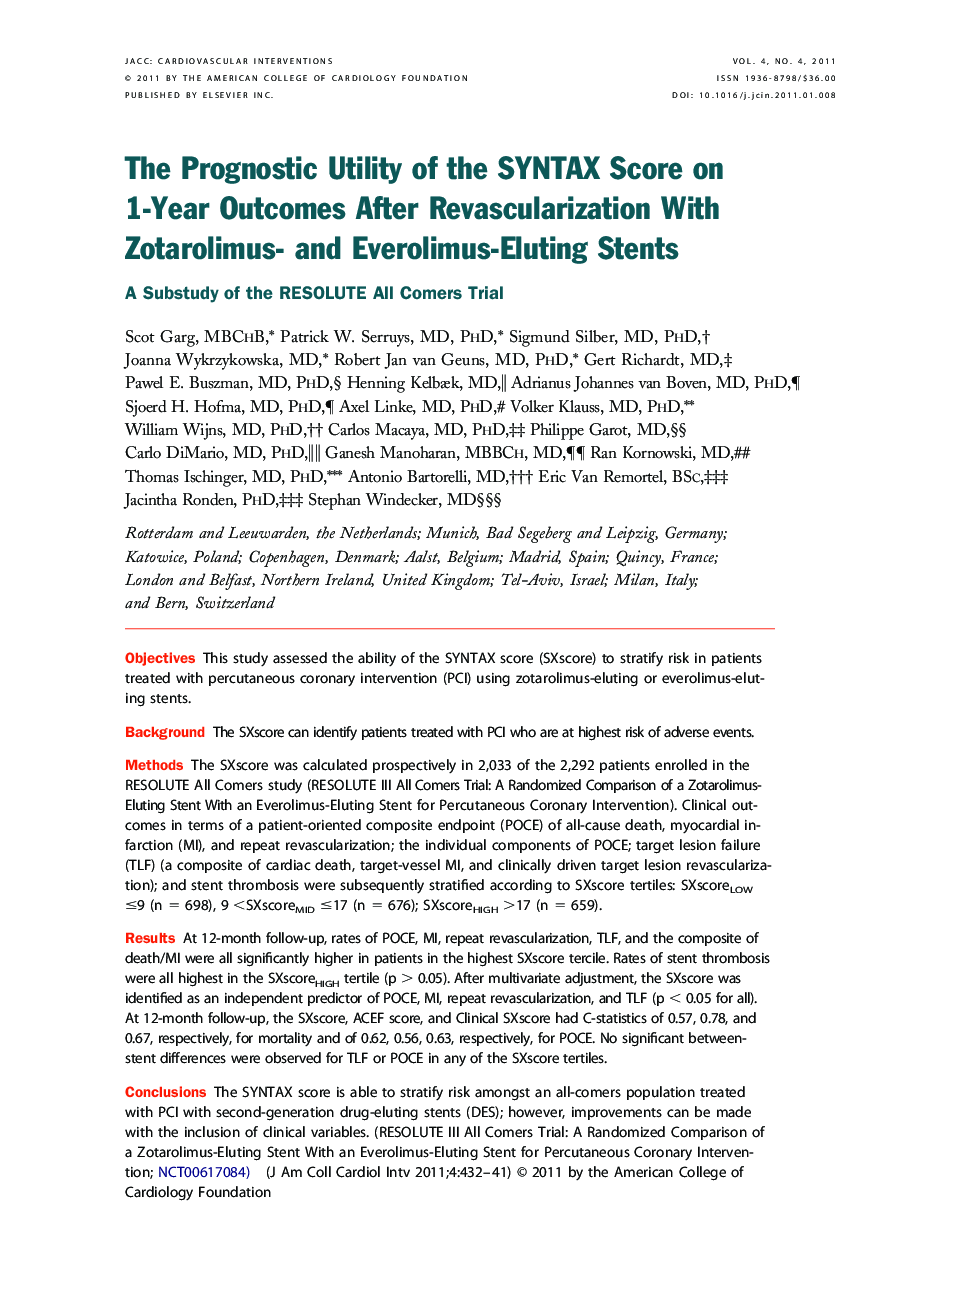 The Prognostic Utility of the SYNTAX Score on 1-Year Outcomes After Revascularization With Zotarolimus- and Everolimus-Eluting Stents : A Substudy of the RESOLUTE All Comers Trial